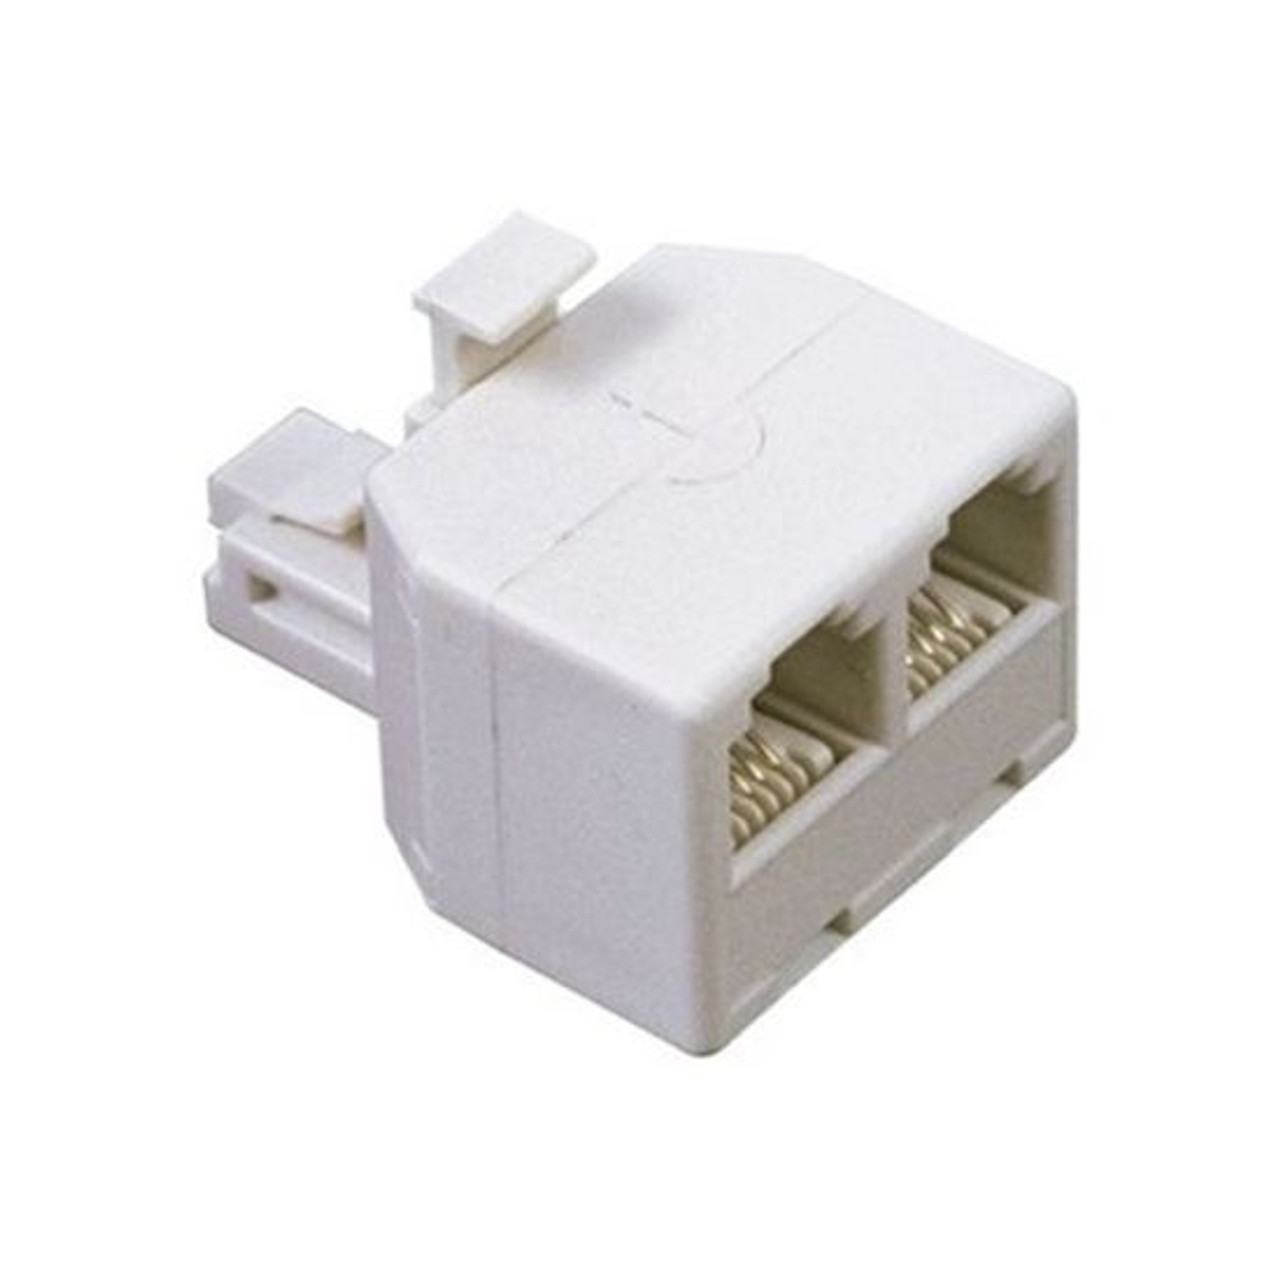 RCA TP257 2-in-1 Modular Adapter White Phone Splitter Jack 2 Way Adapter Divider Line Telephone Signal Snap-In Connector Plug Cable Device